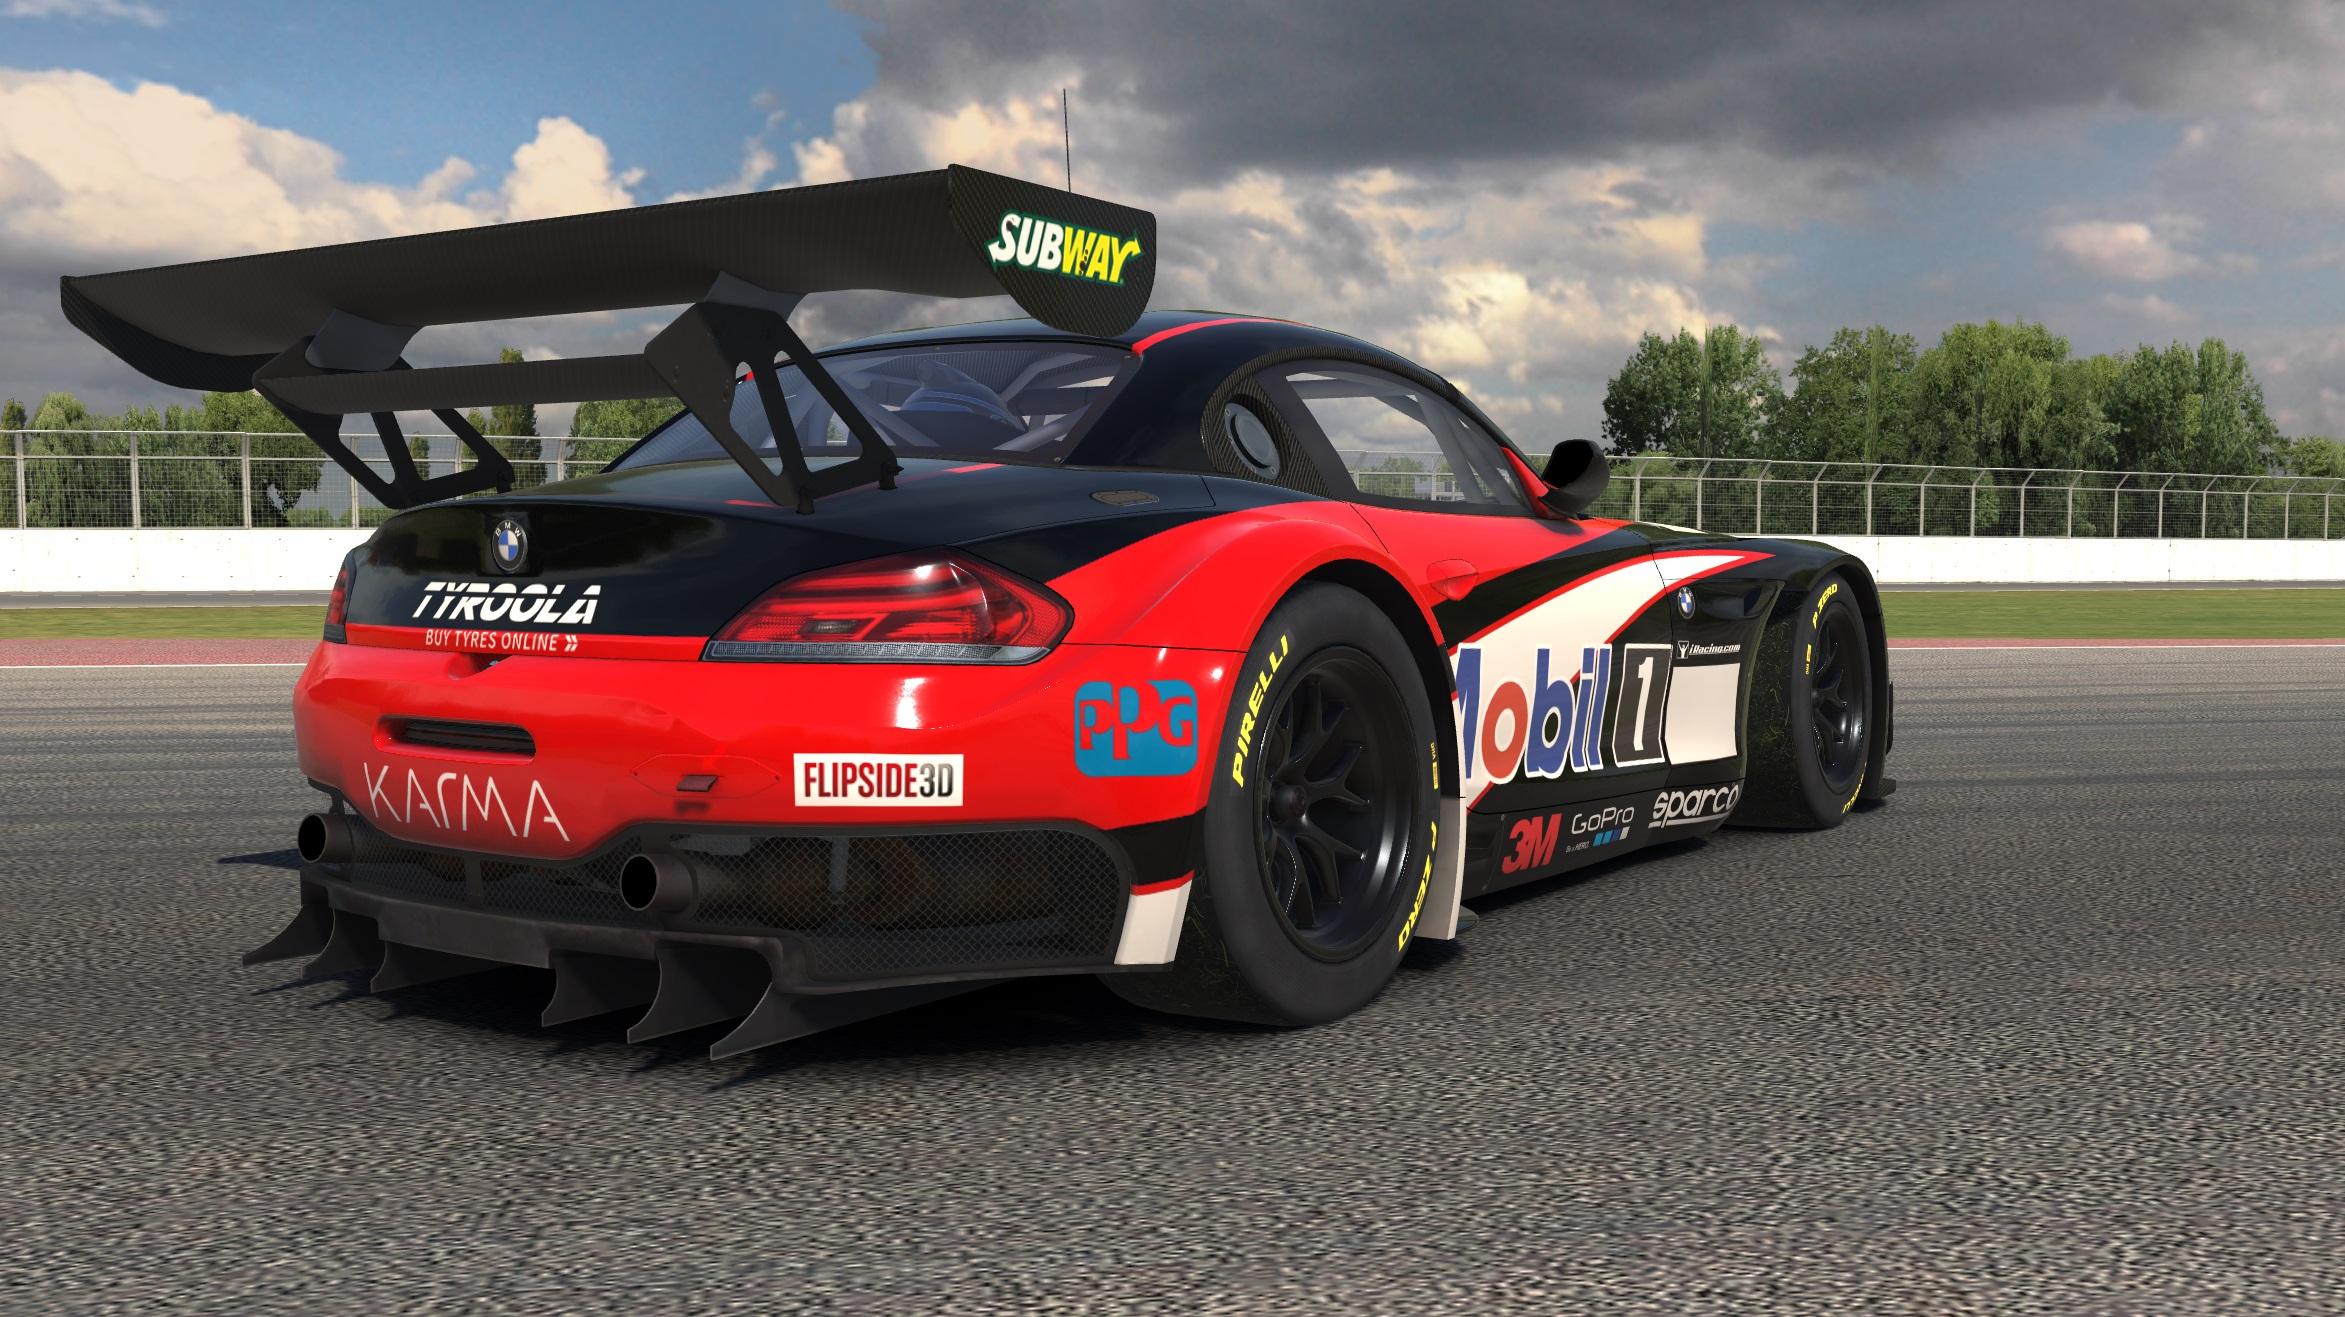  Mobil  1 BMW  Z4  by Tony P Trading Paints